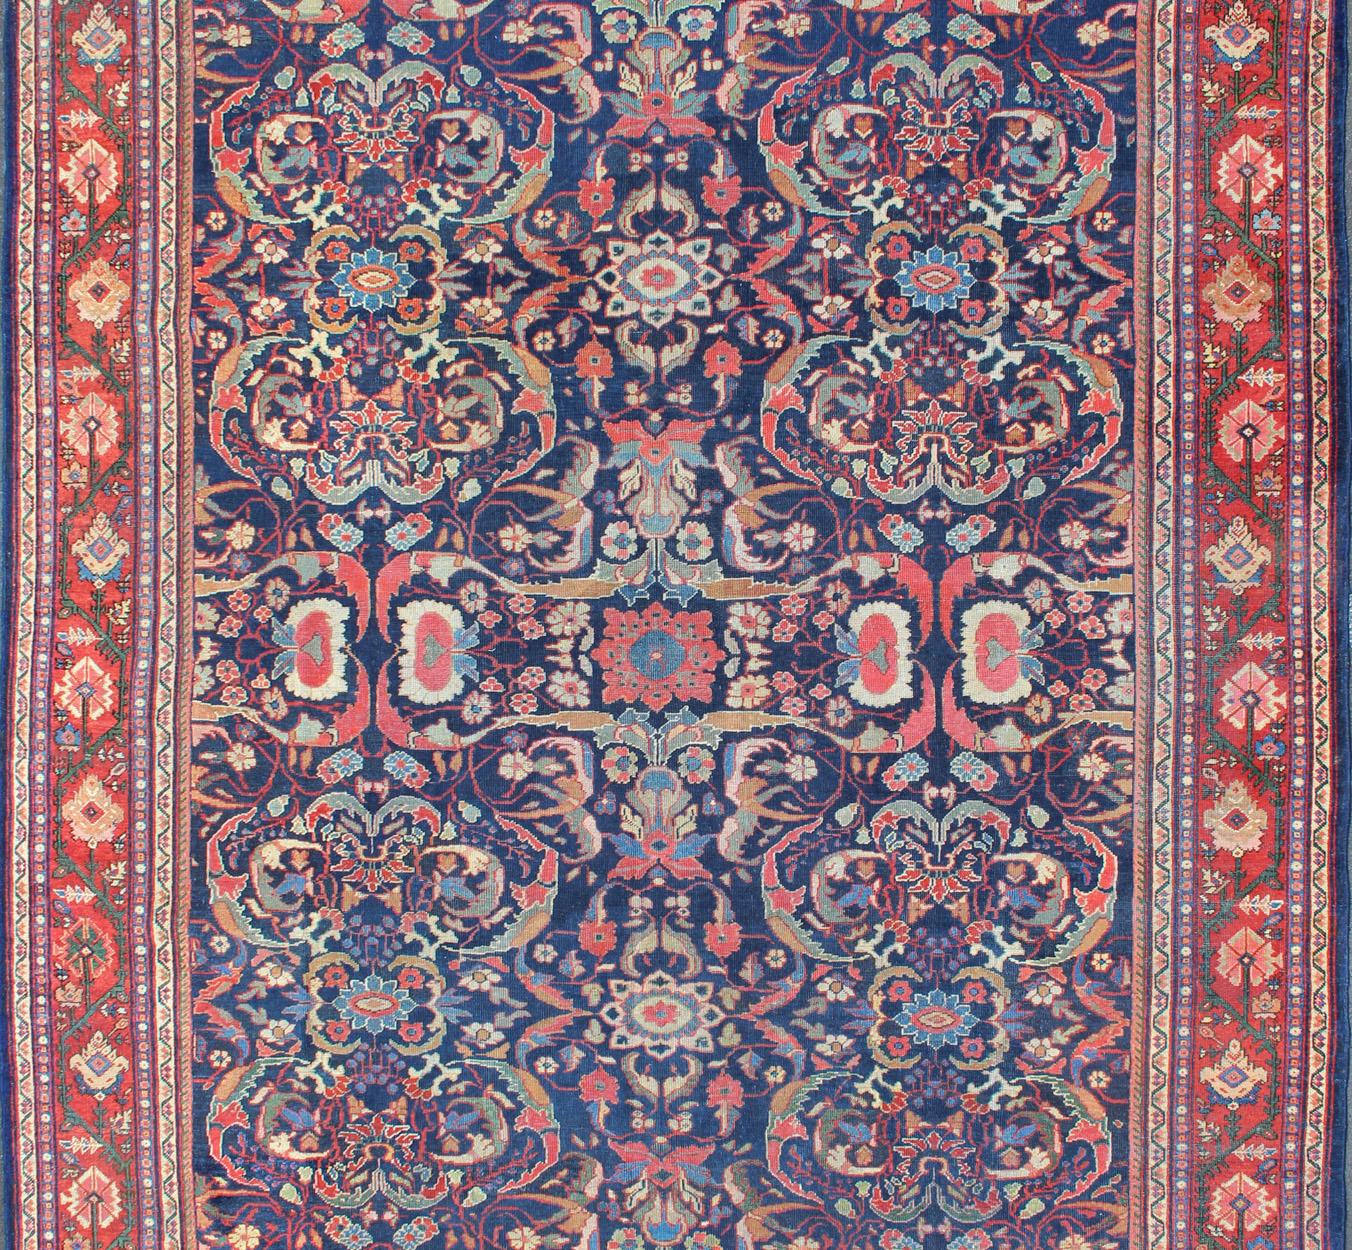 Antique Persian Sultanabad in Blue background and colorful field.  Keivan Woven Arts/rug/ B-0536, country of origin / type: Iran / Sultanabad, circa 1910

Measures: 9 x 12'1   

This gorgeous antique Persian Sultanabad rug (circa 1910s) relies